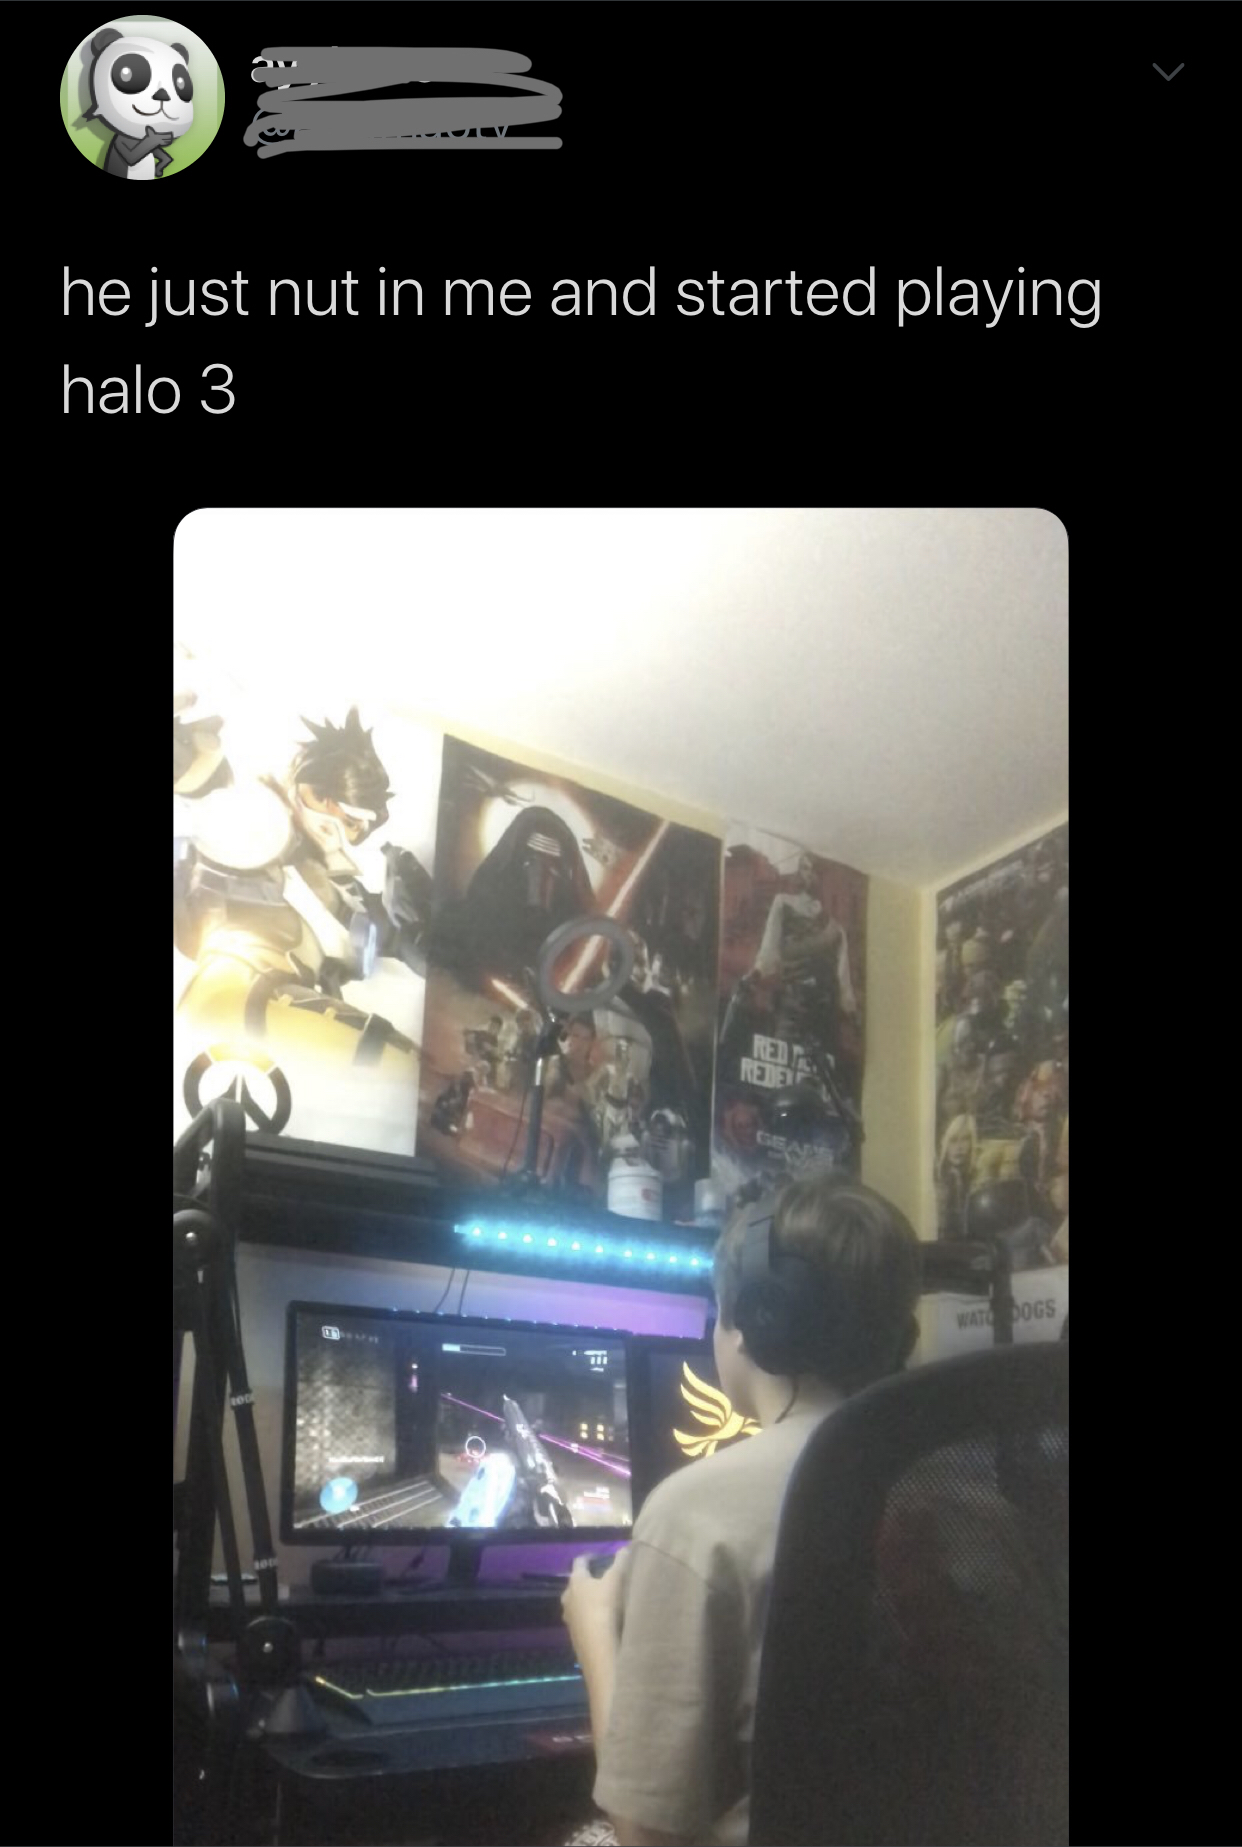 multimedia - he just nut in me and started playing halo 3